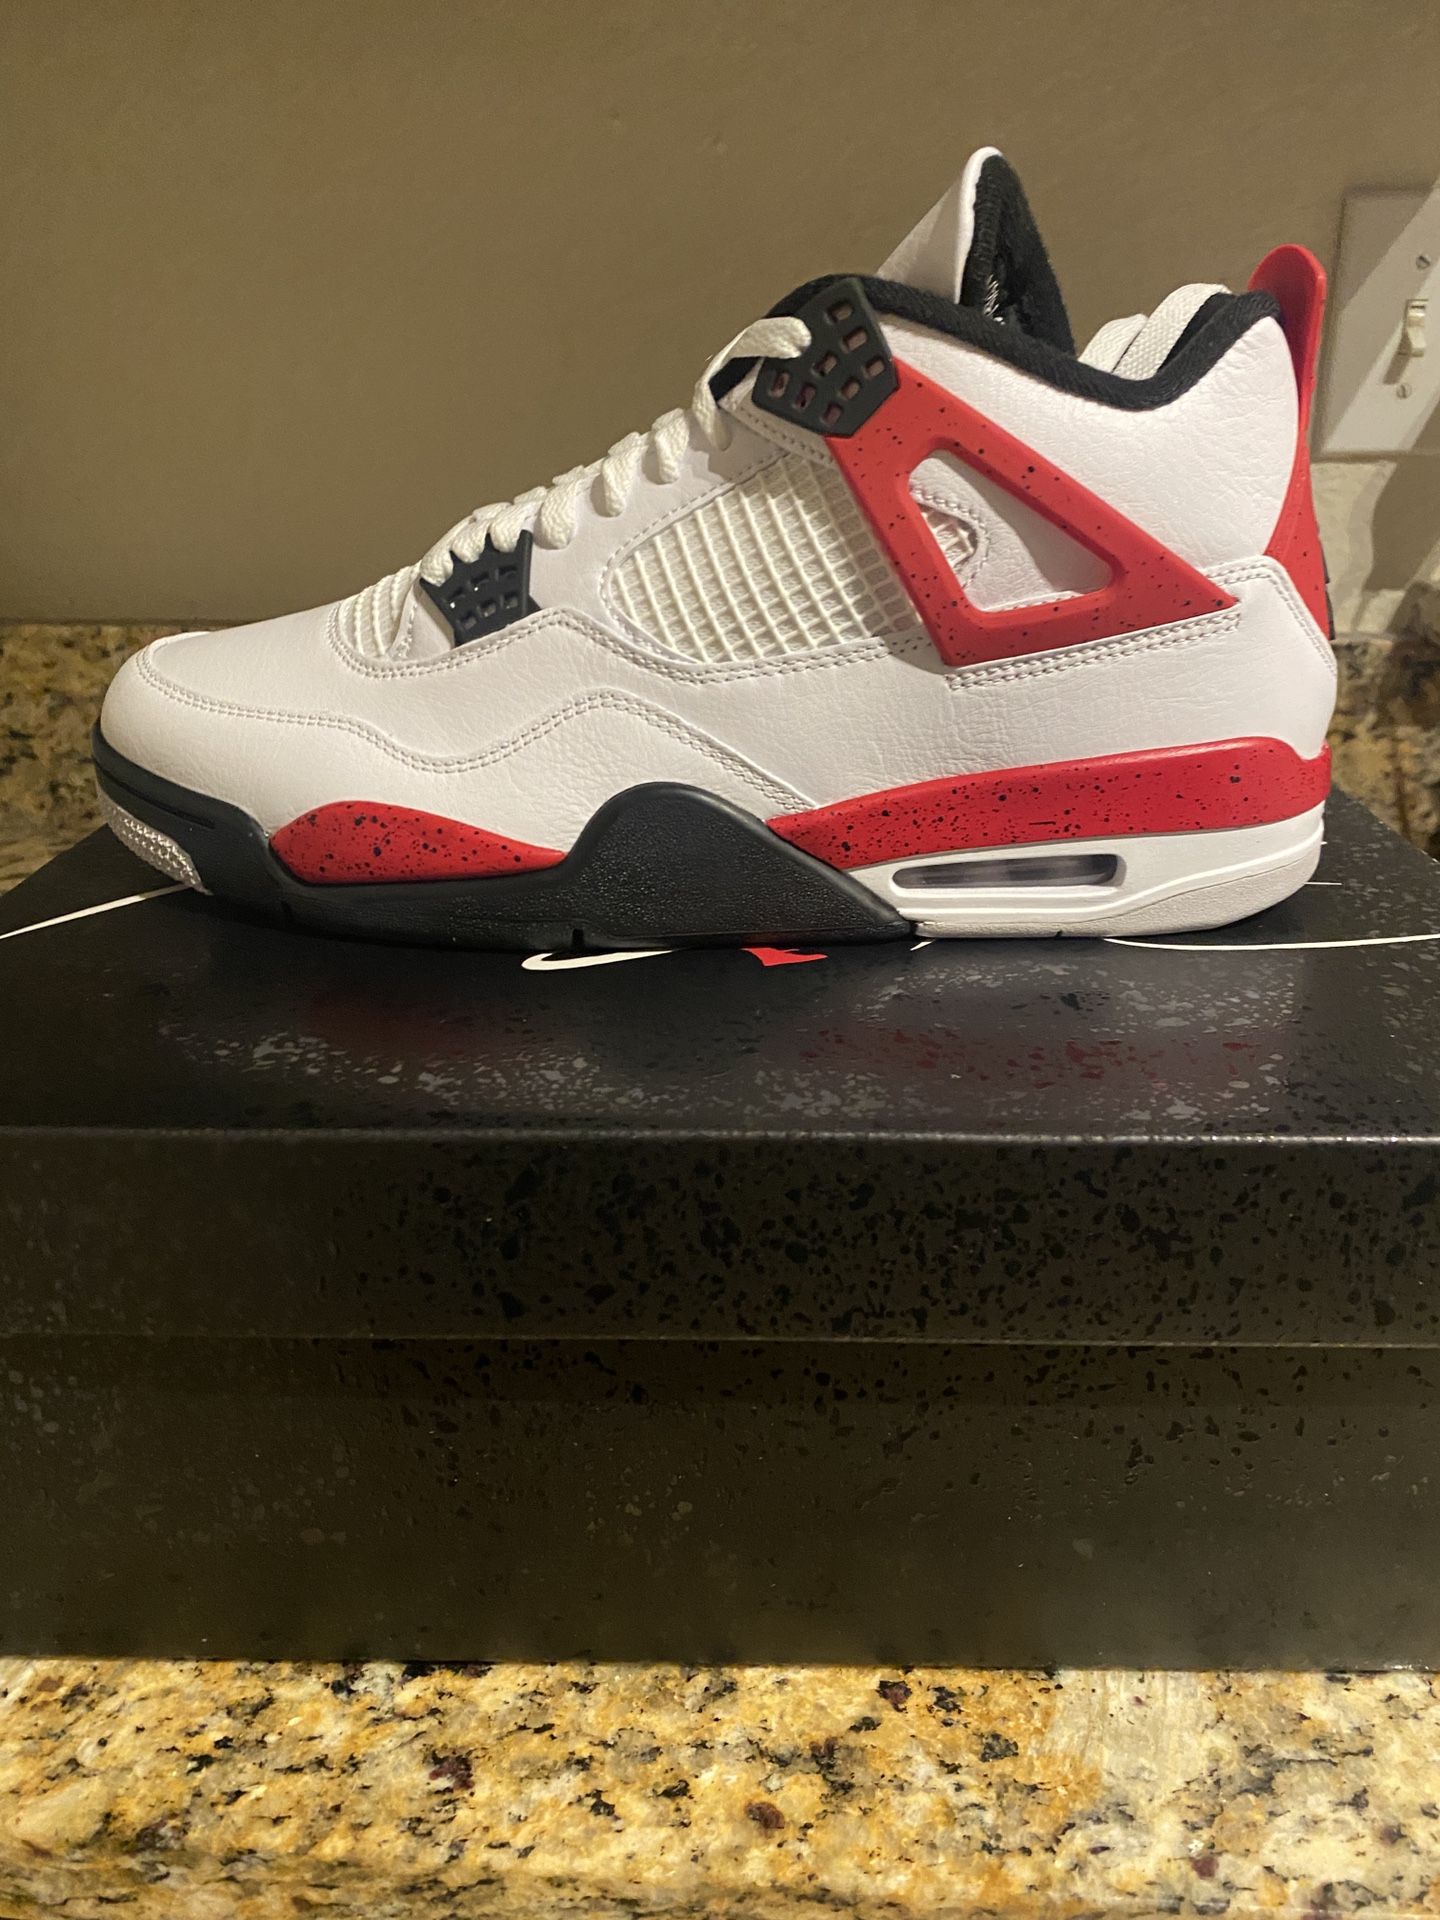 Jordan 4 Red Cement 🔥 Sizes 9.5-12 Available 